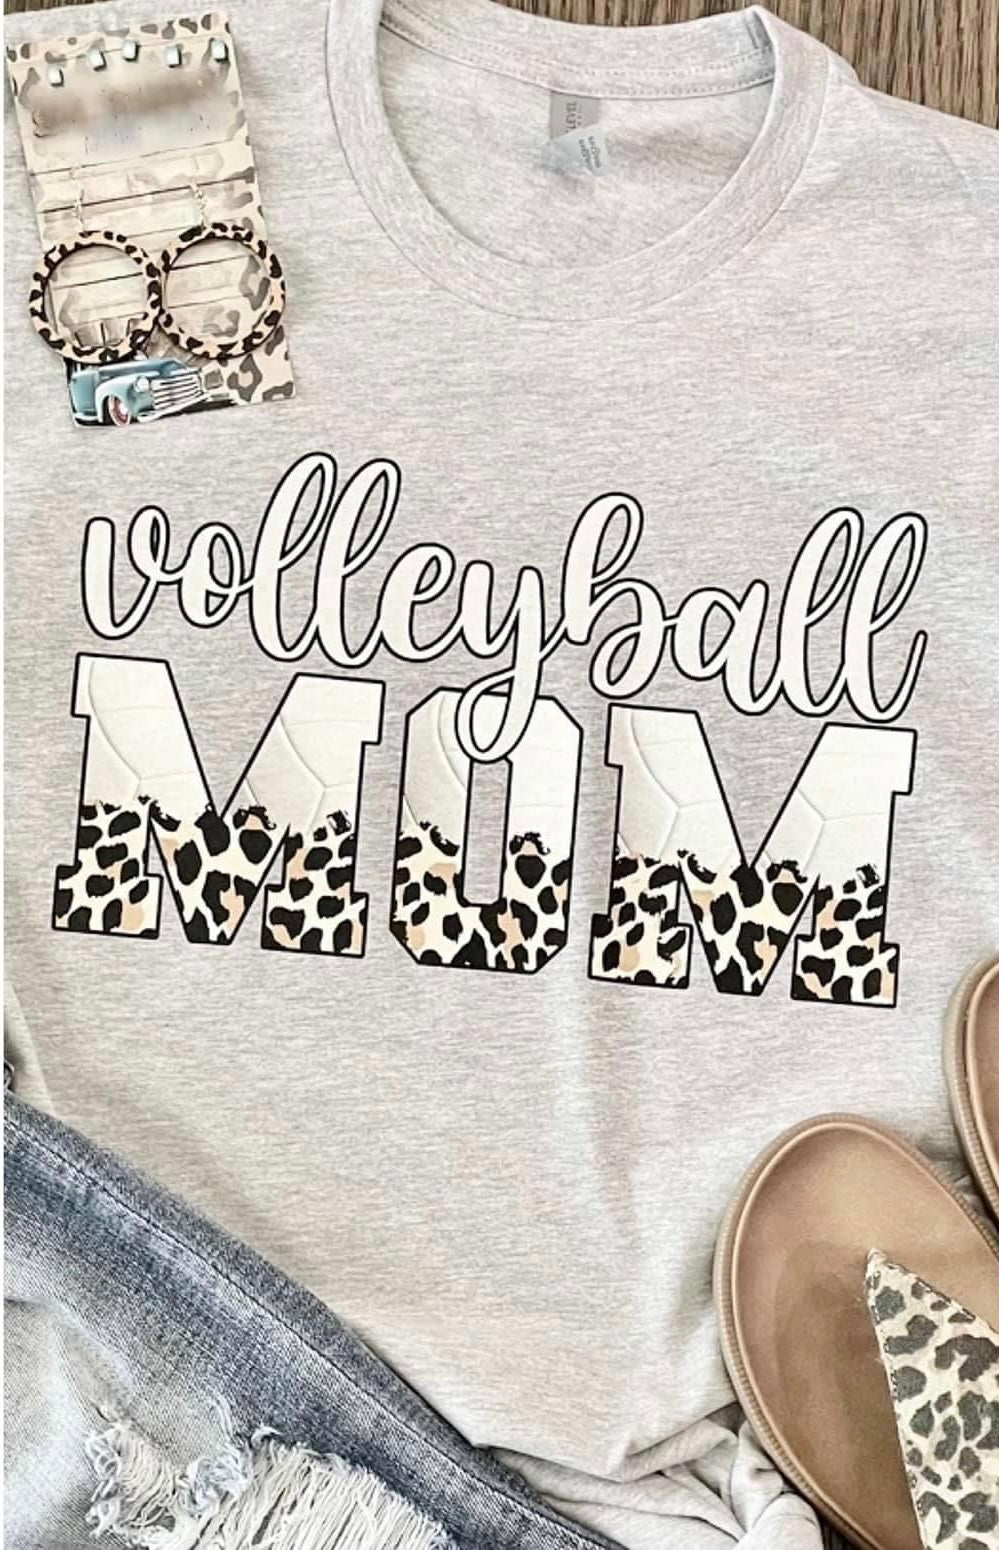 Volleyball Mom tee preorder